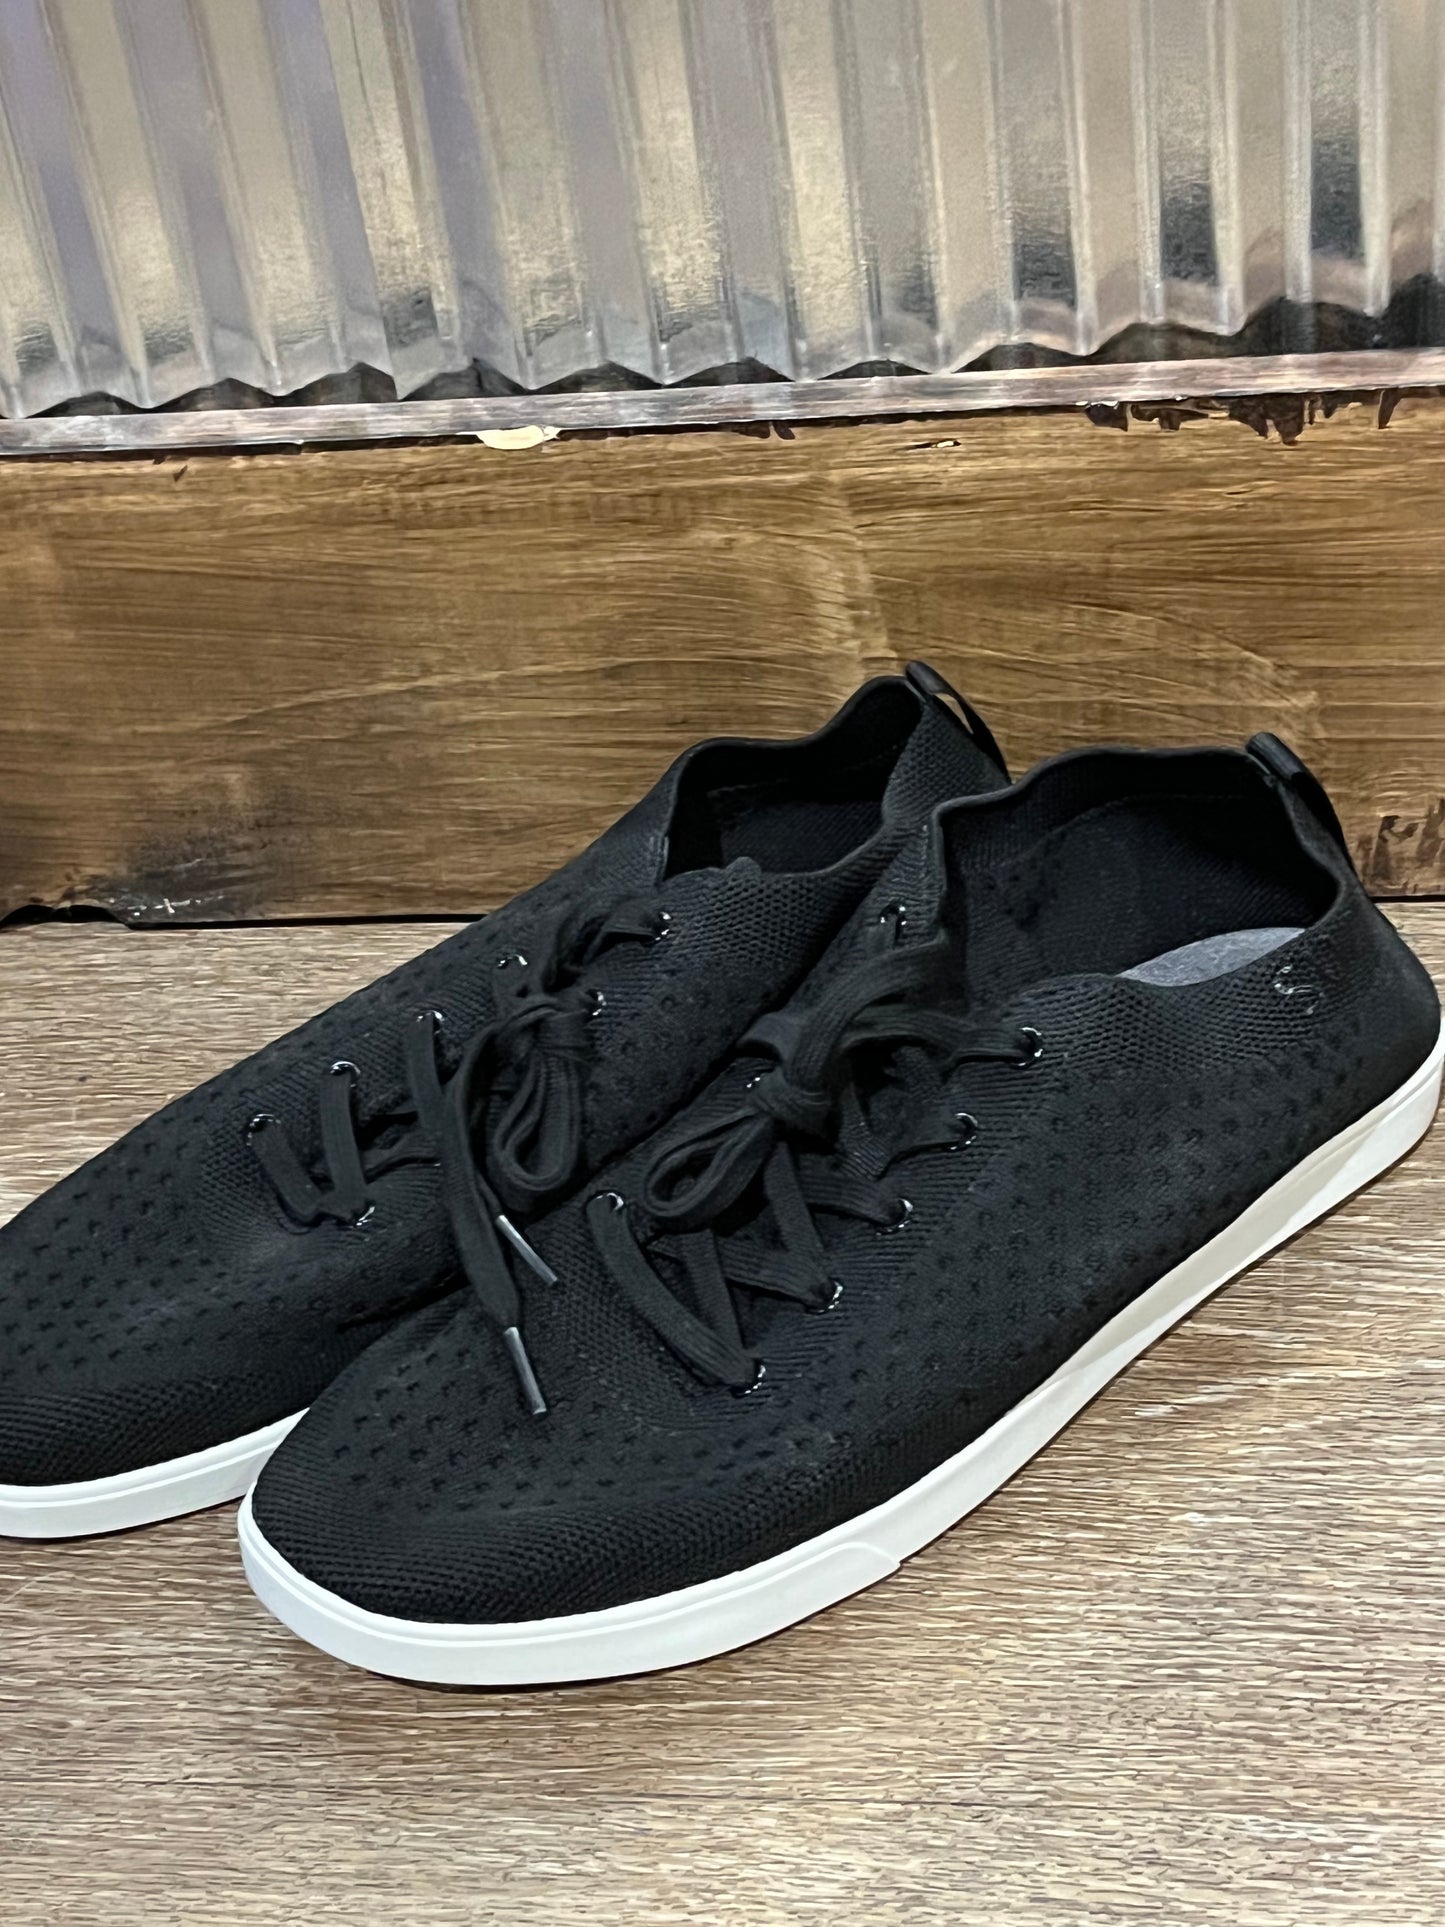 SUAVS Black Low Top Slip on lace up men's sneakers, 12